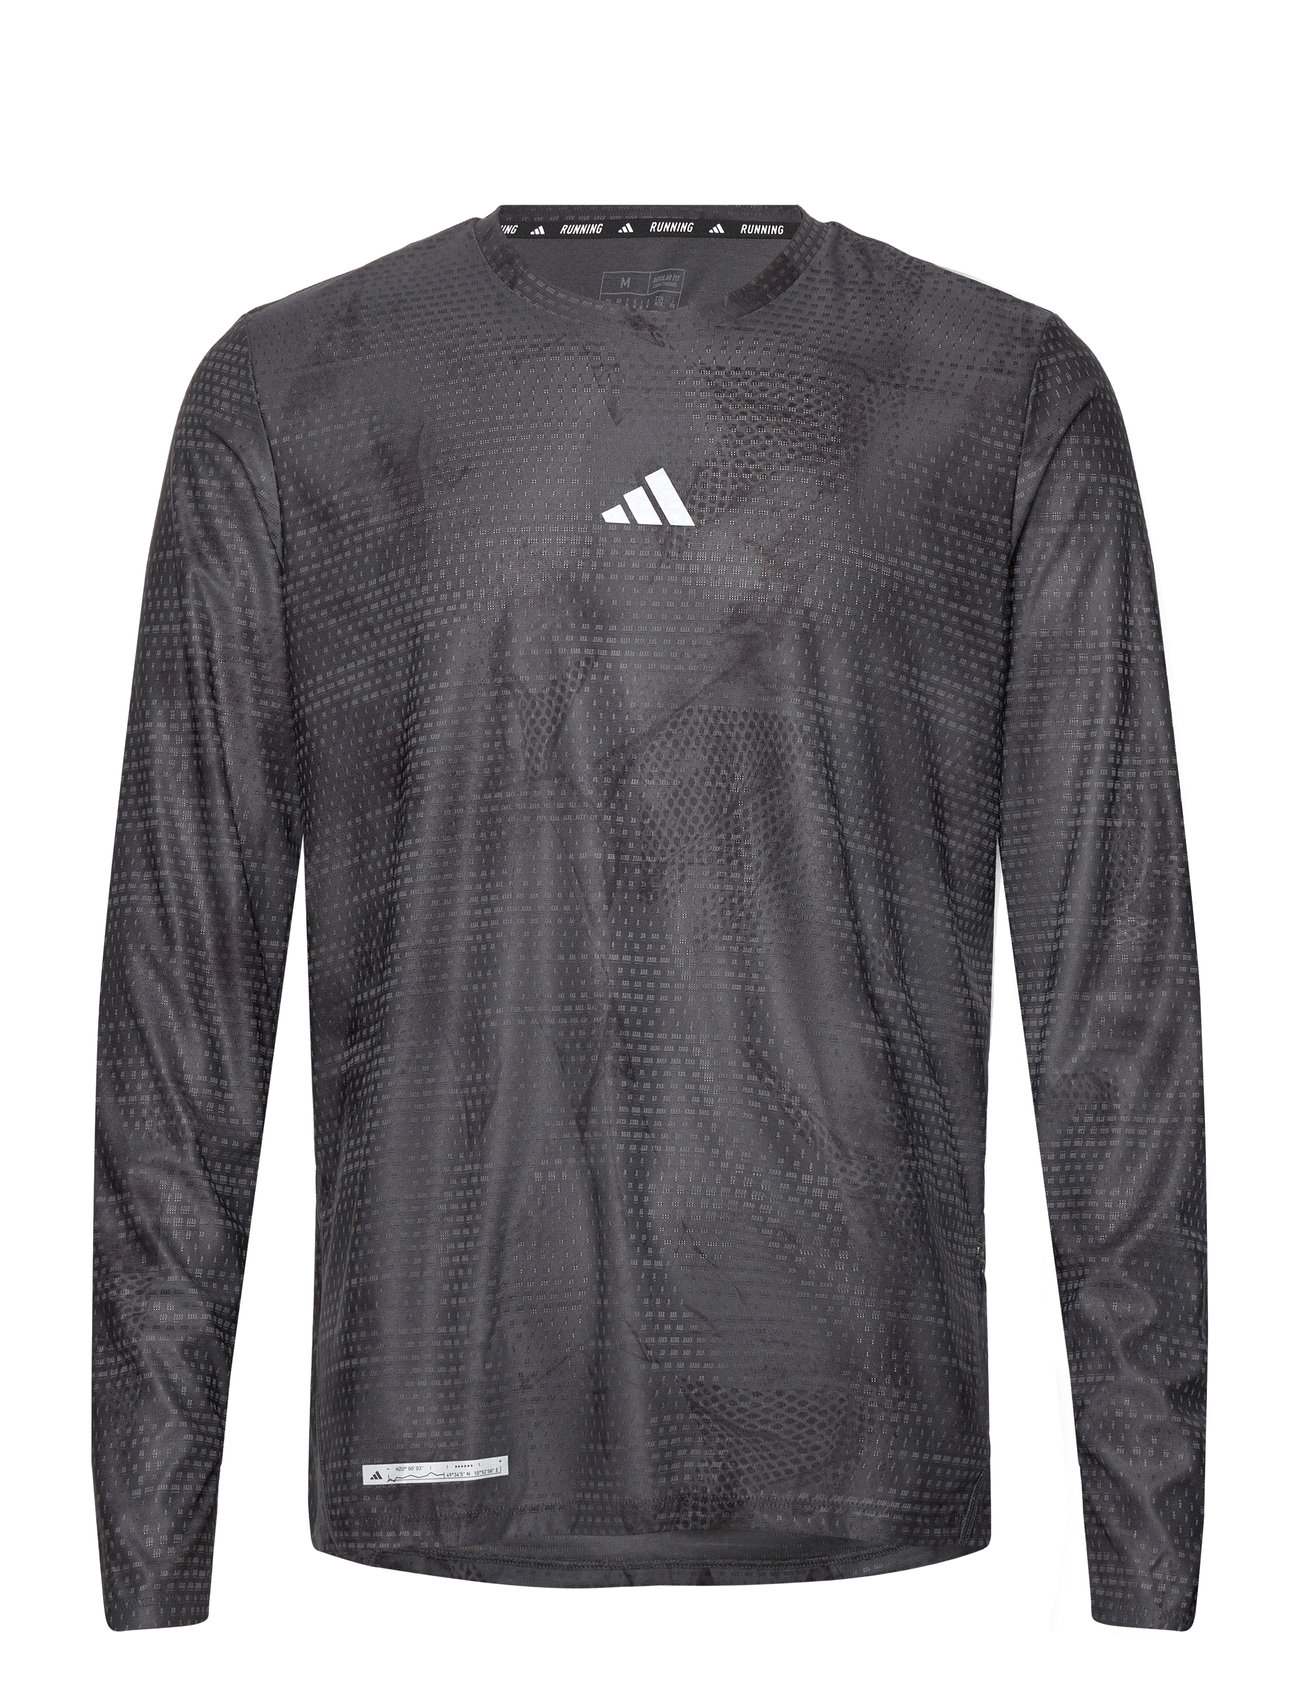 New York City FC Uncovered Adidas Climalite Synthetic Ultimate Long Sleeve  Shirt